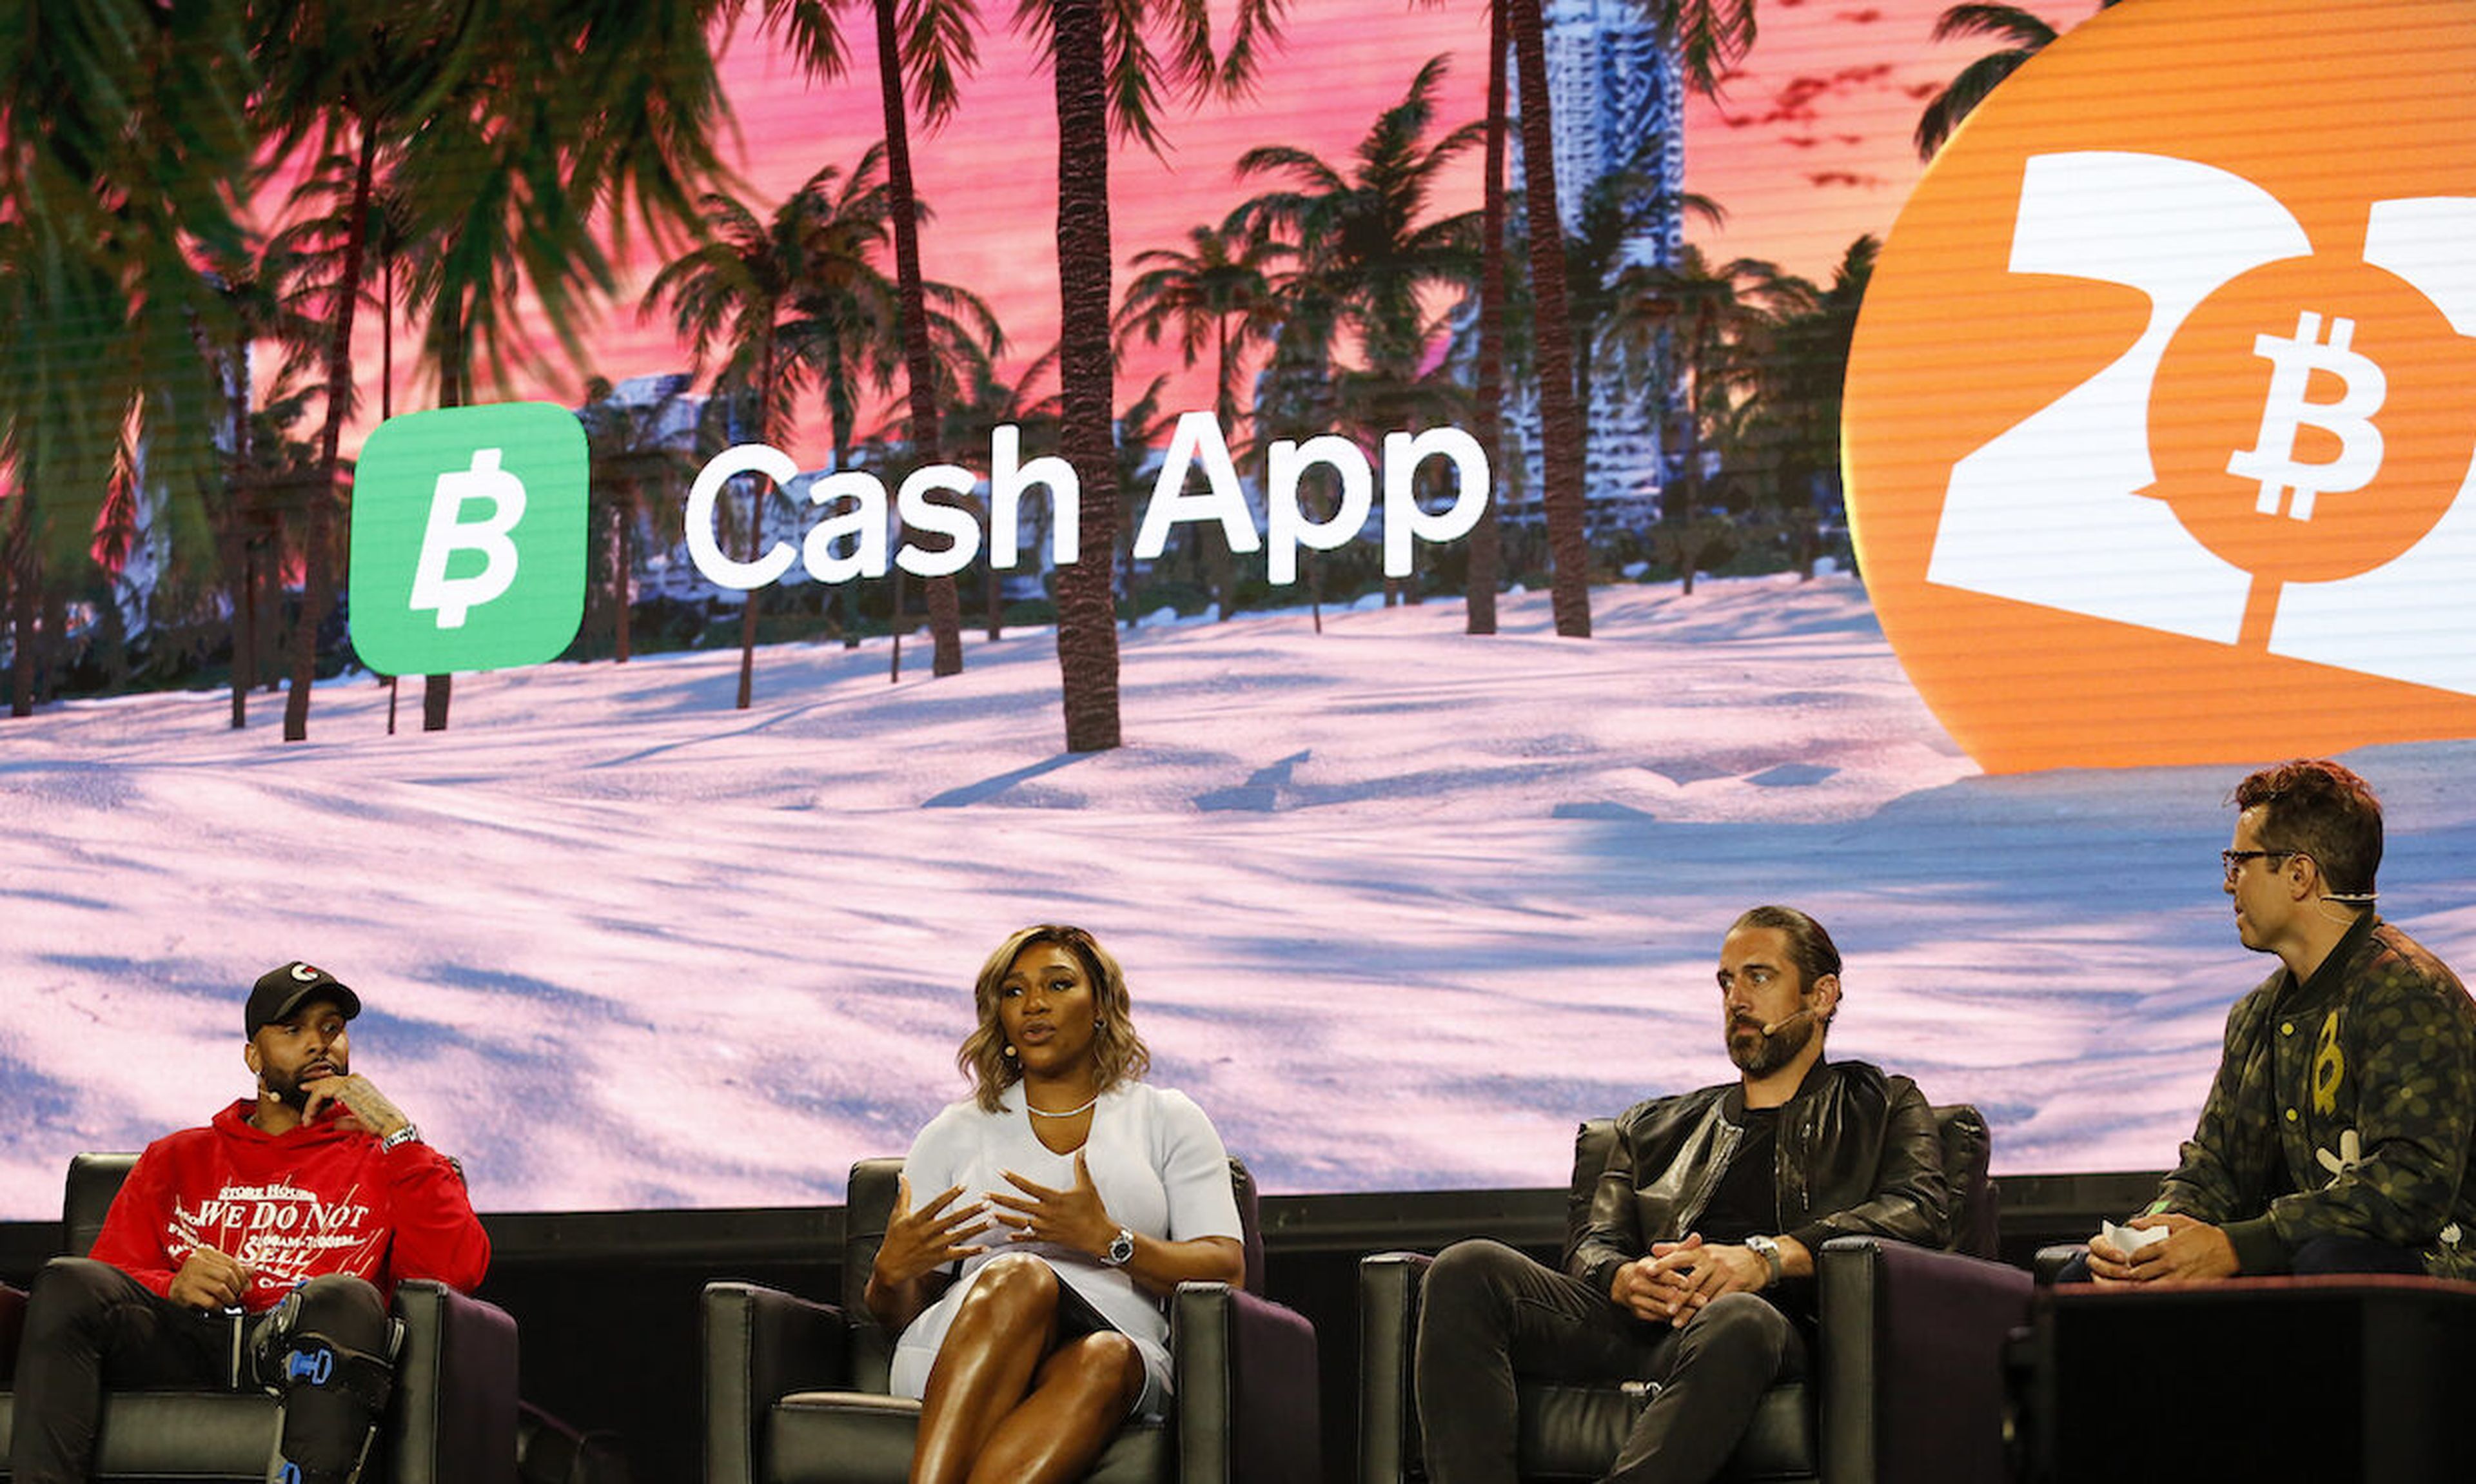 Today’s columnist, Jadee Hanson of Code42, points out that we’ve seen many insider threat cases this year, such as the compromise of the investment arm of Block Inc.’s CashApp. Hanson offers three ways to take an empathetic approach to insider risk. (Photo by Marco Bello/Getty Images)